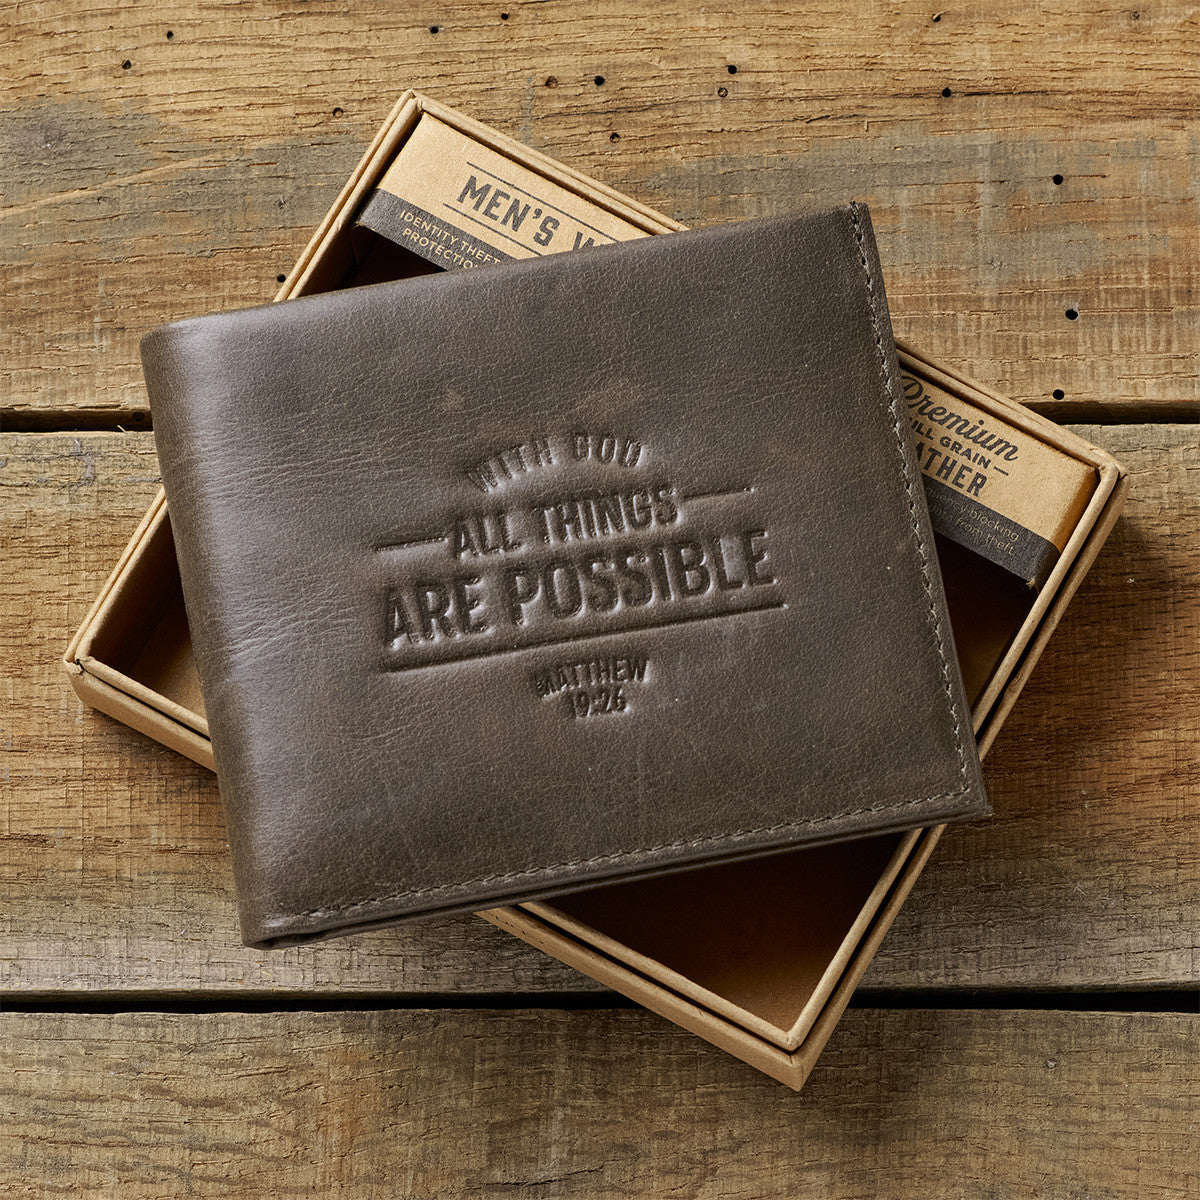 With God All Things Are Possible Brown Genuine Leather Wallet - Matthew 19:26 - The Christian Gift Company